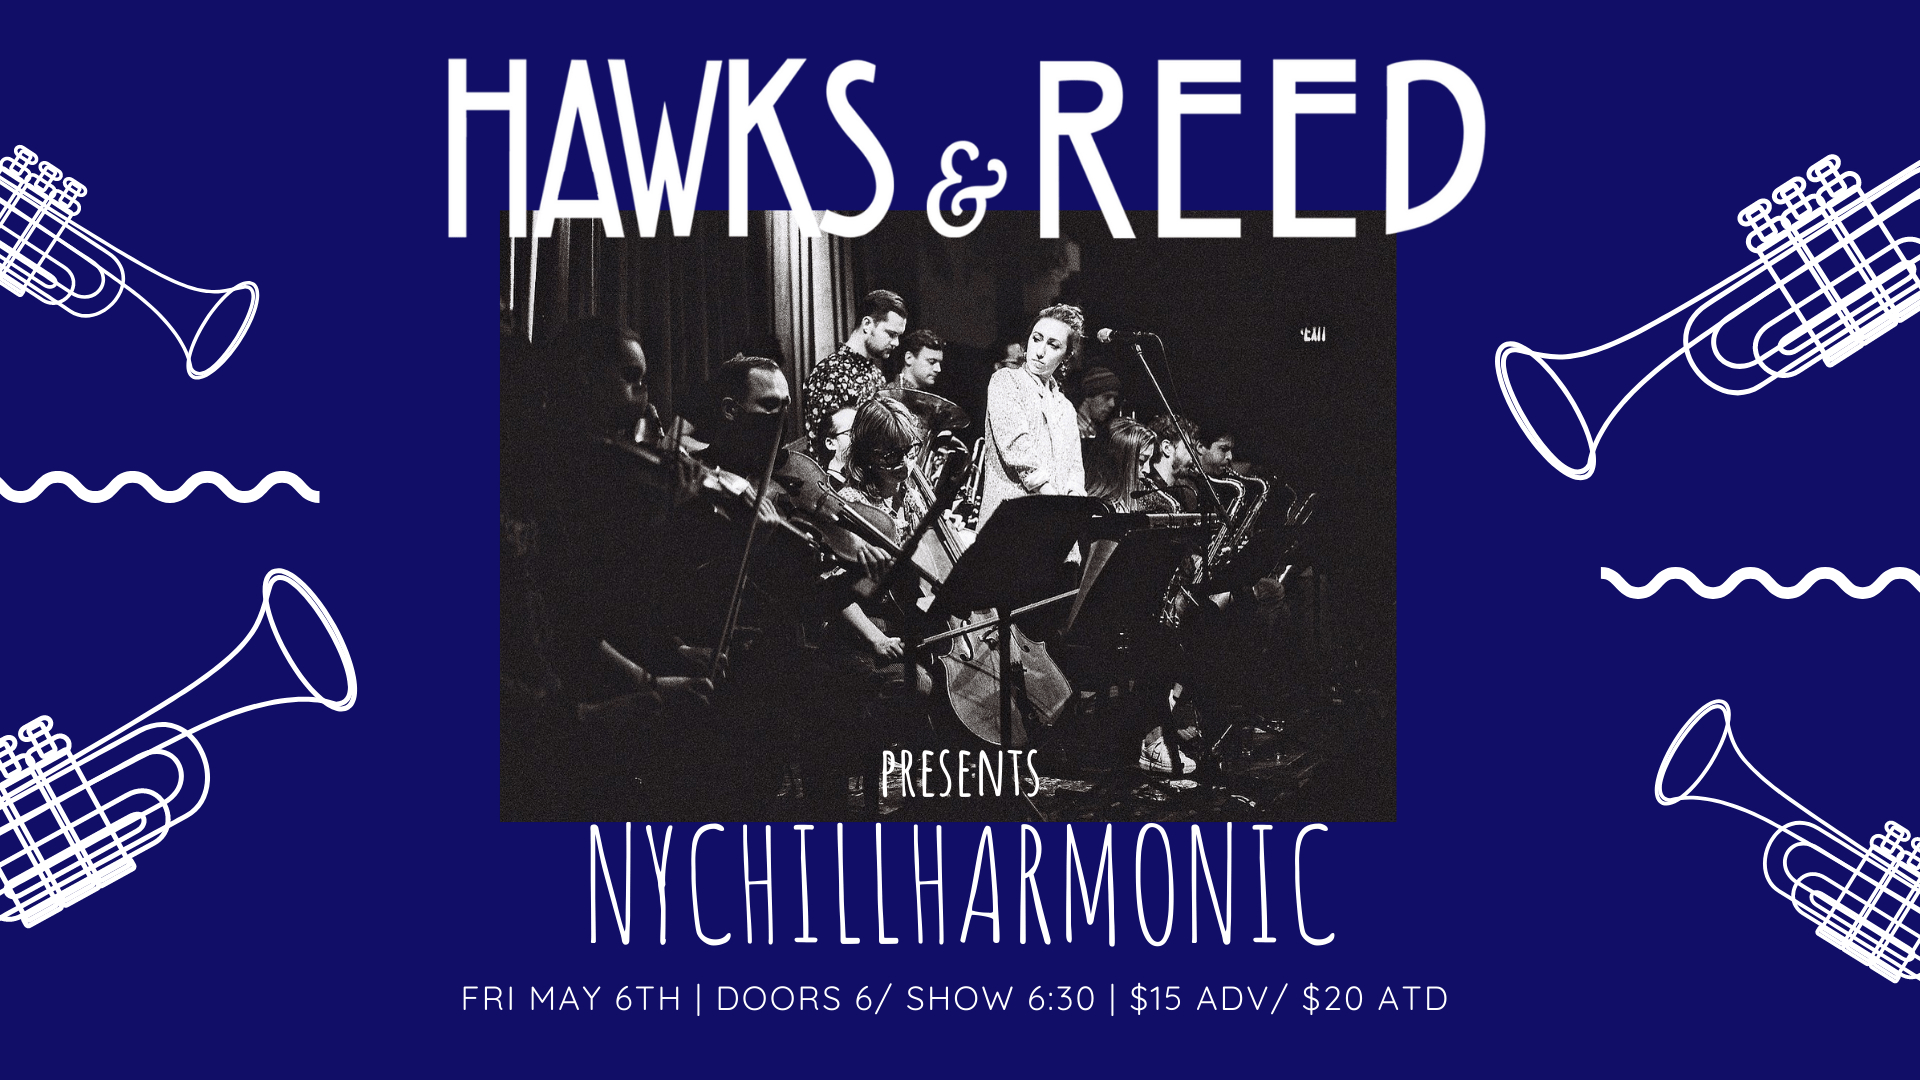 The NYChillharmonic at Hawks and Reed